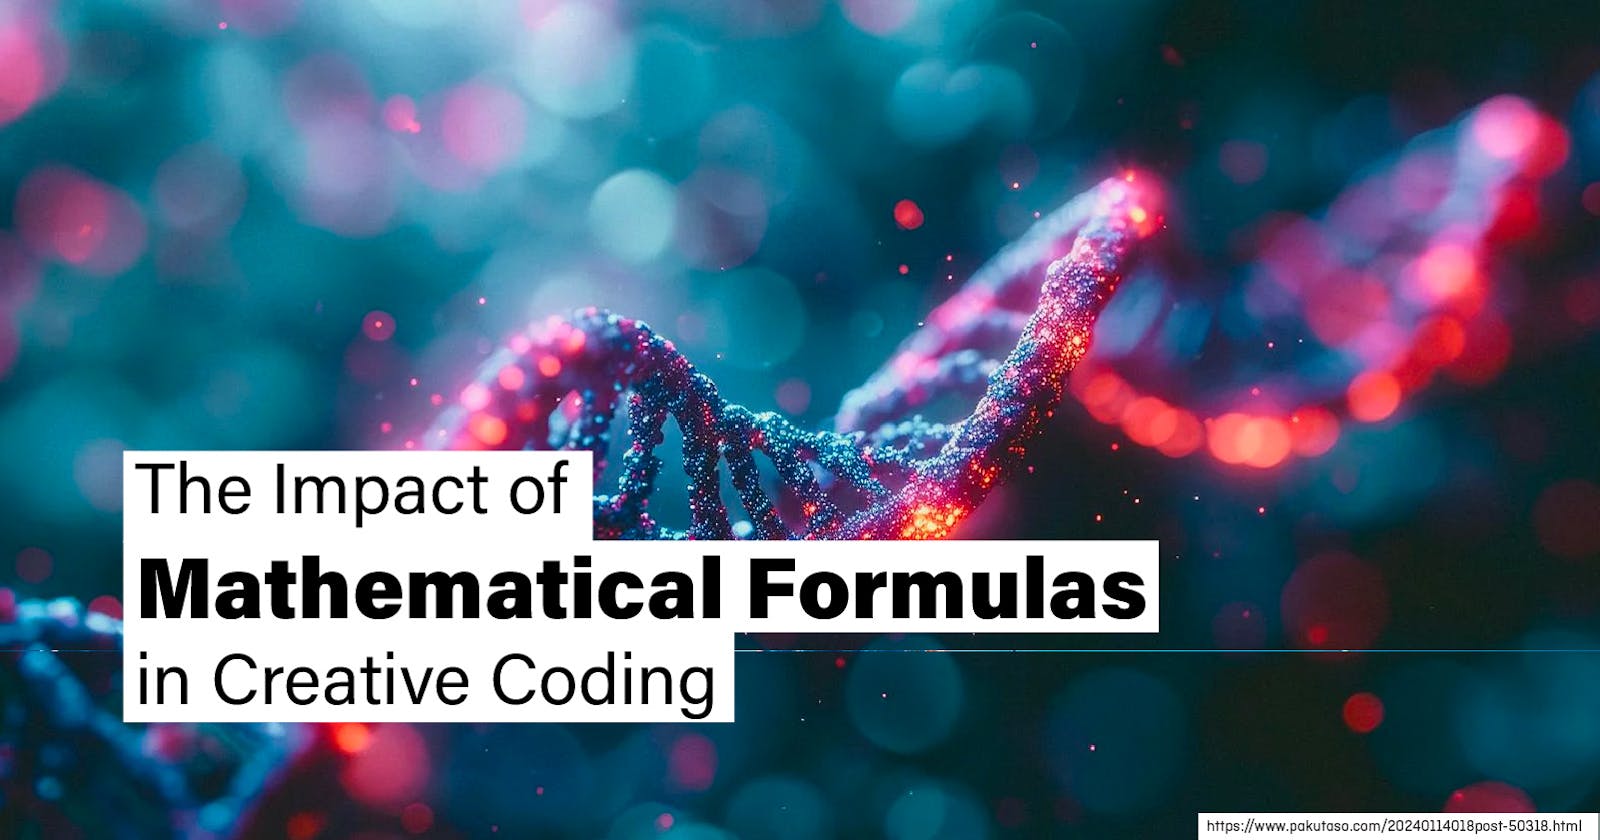 The Impact of Mathematical Formulas in Creative Coding